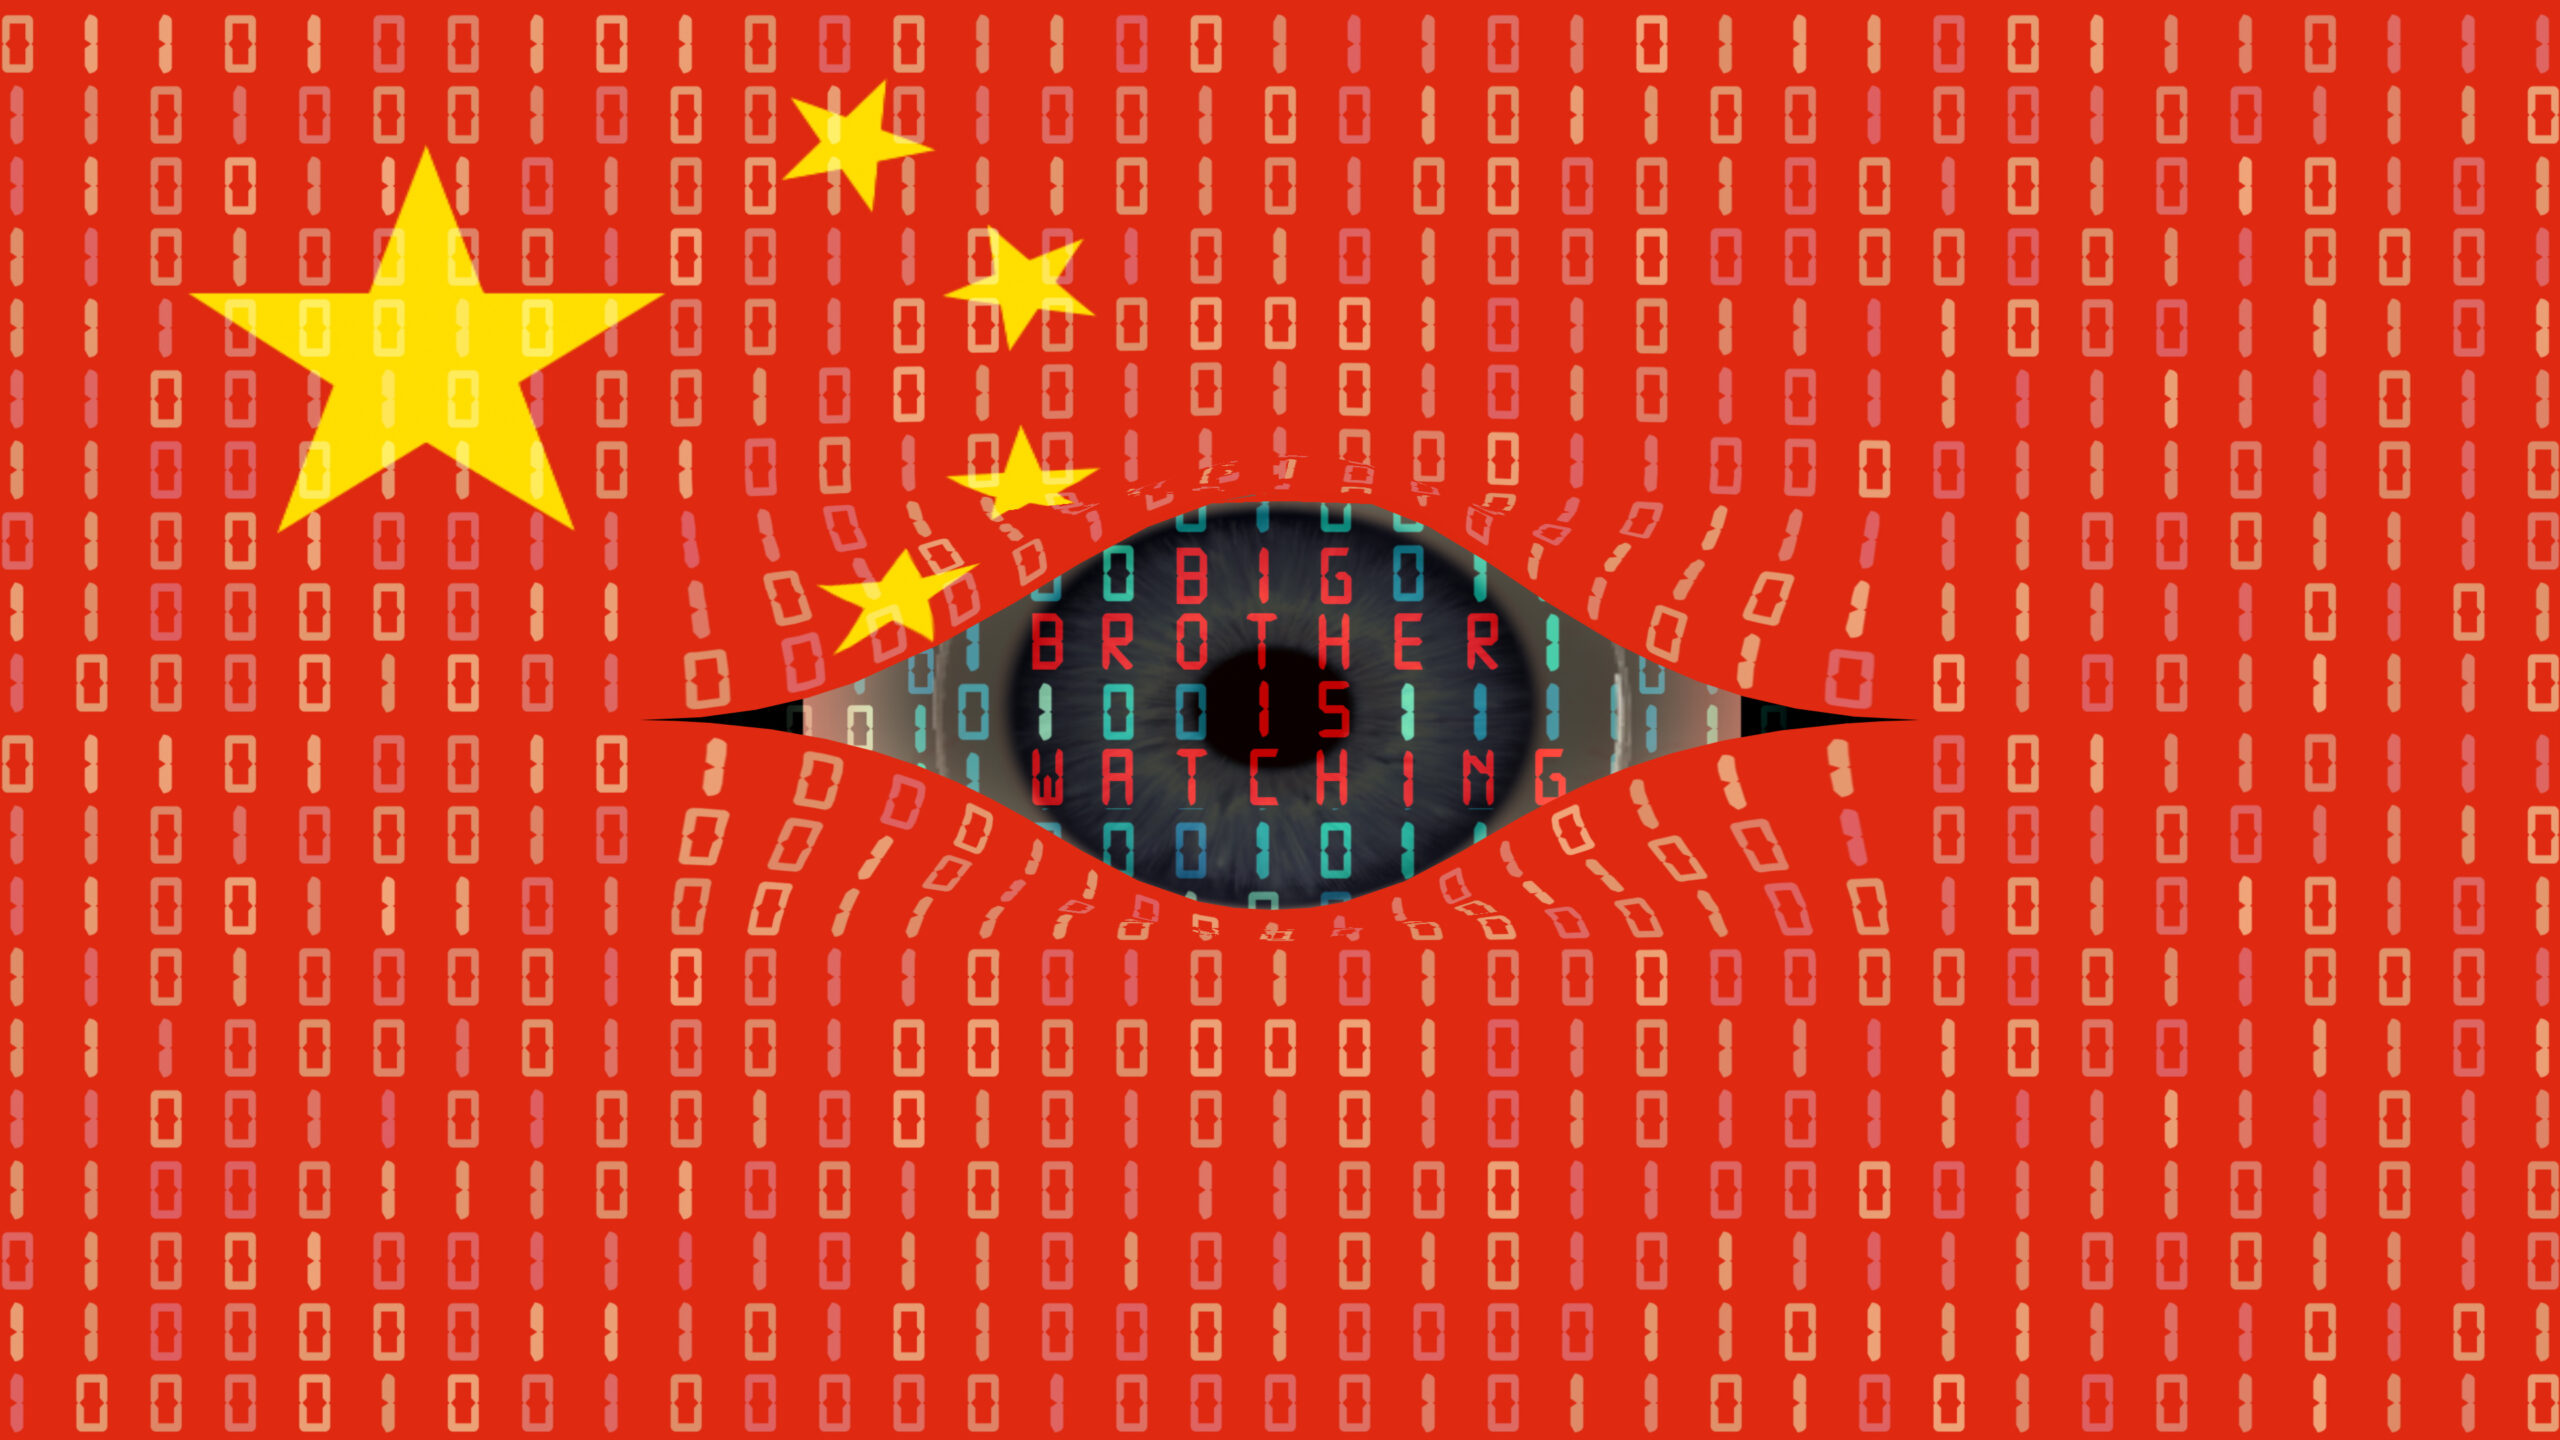 Internet spying, surveillance, and cyber security in China